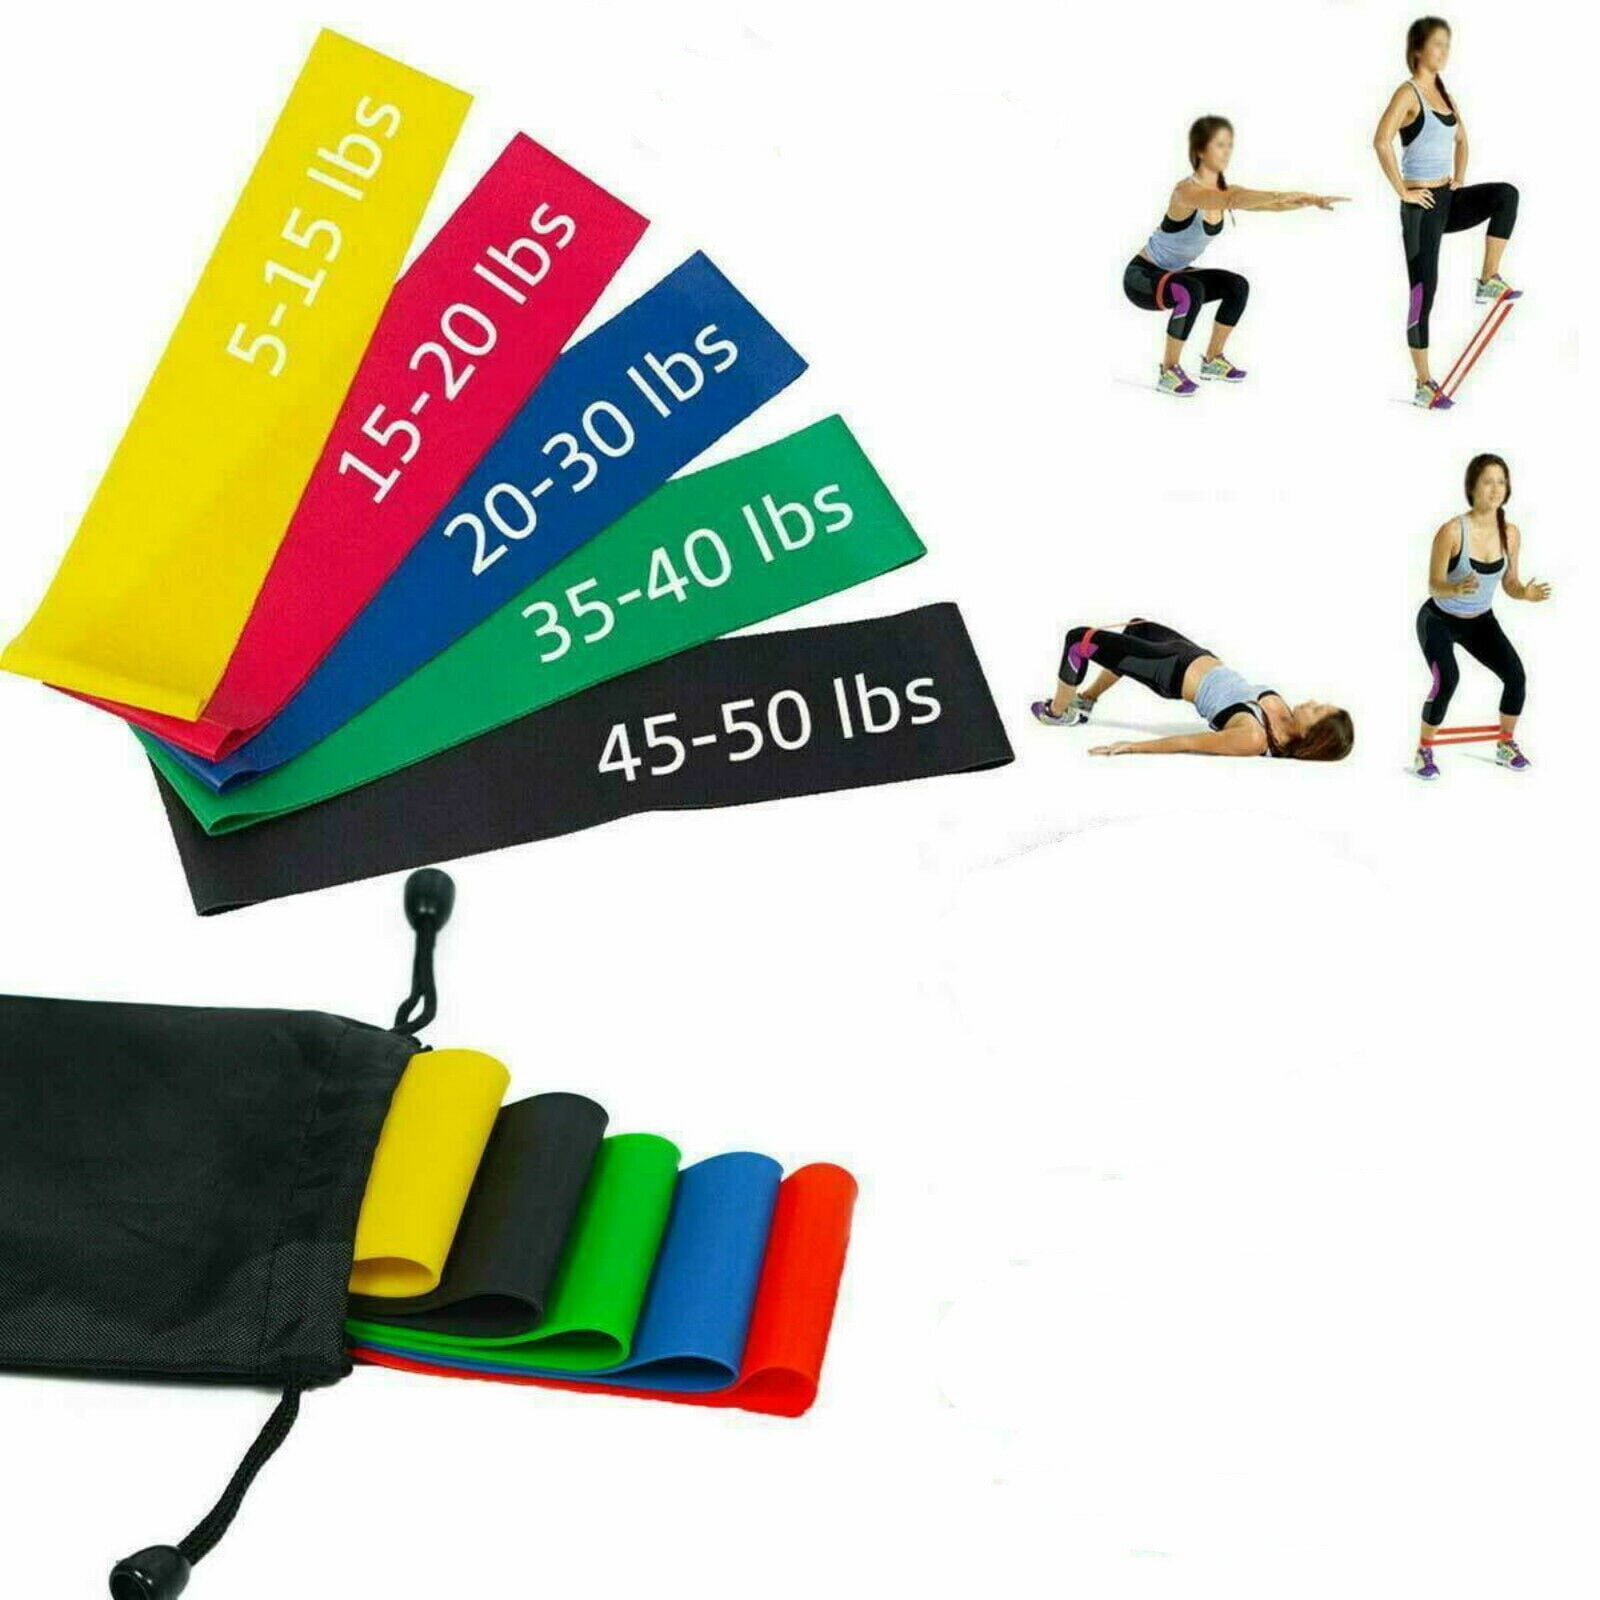 With Head Band. Details about   New 3 Piece Resistance Bands Set 